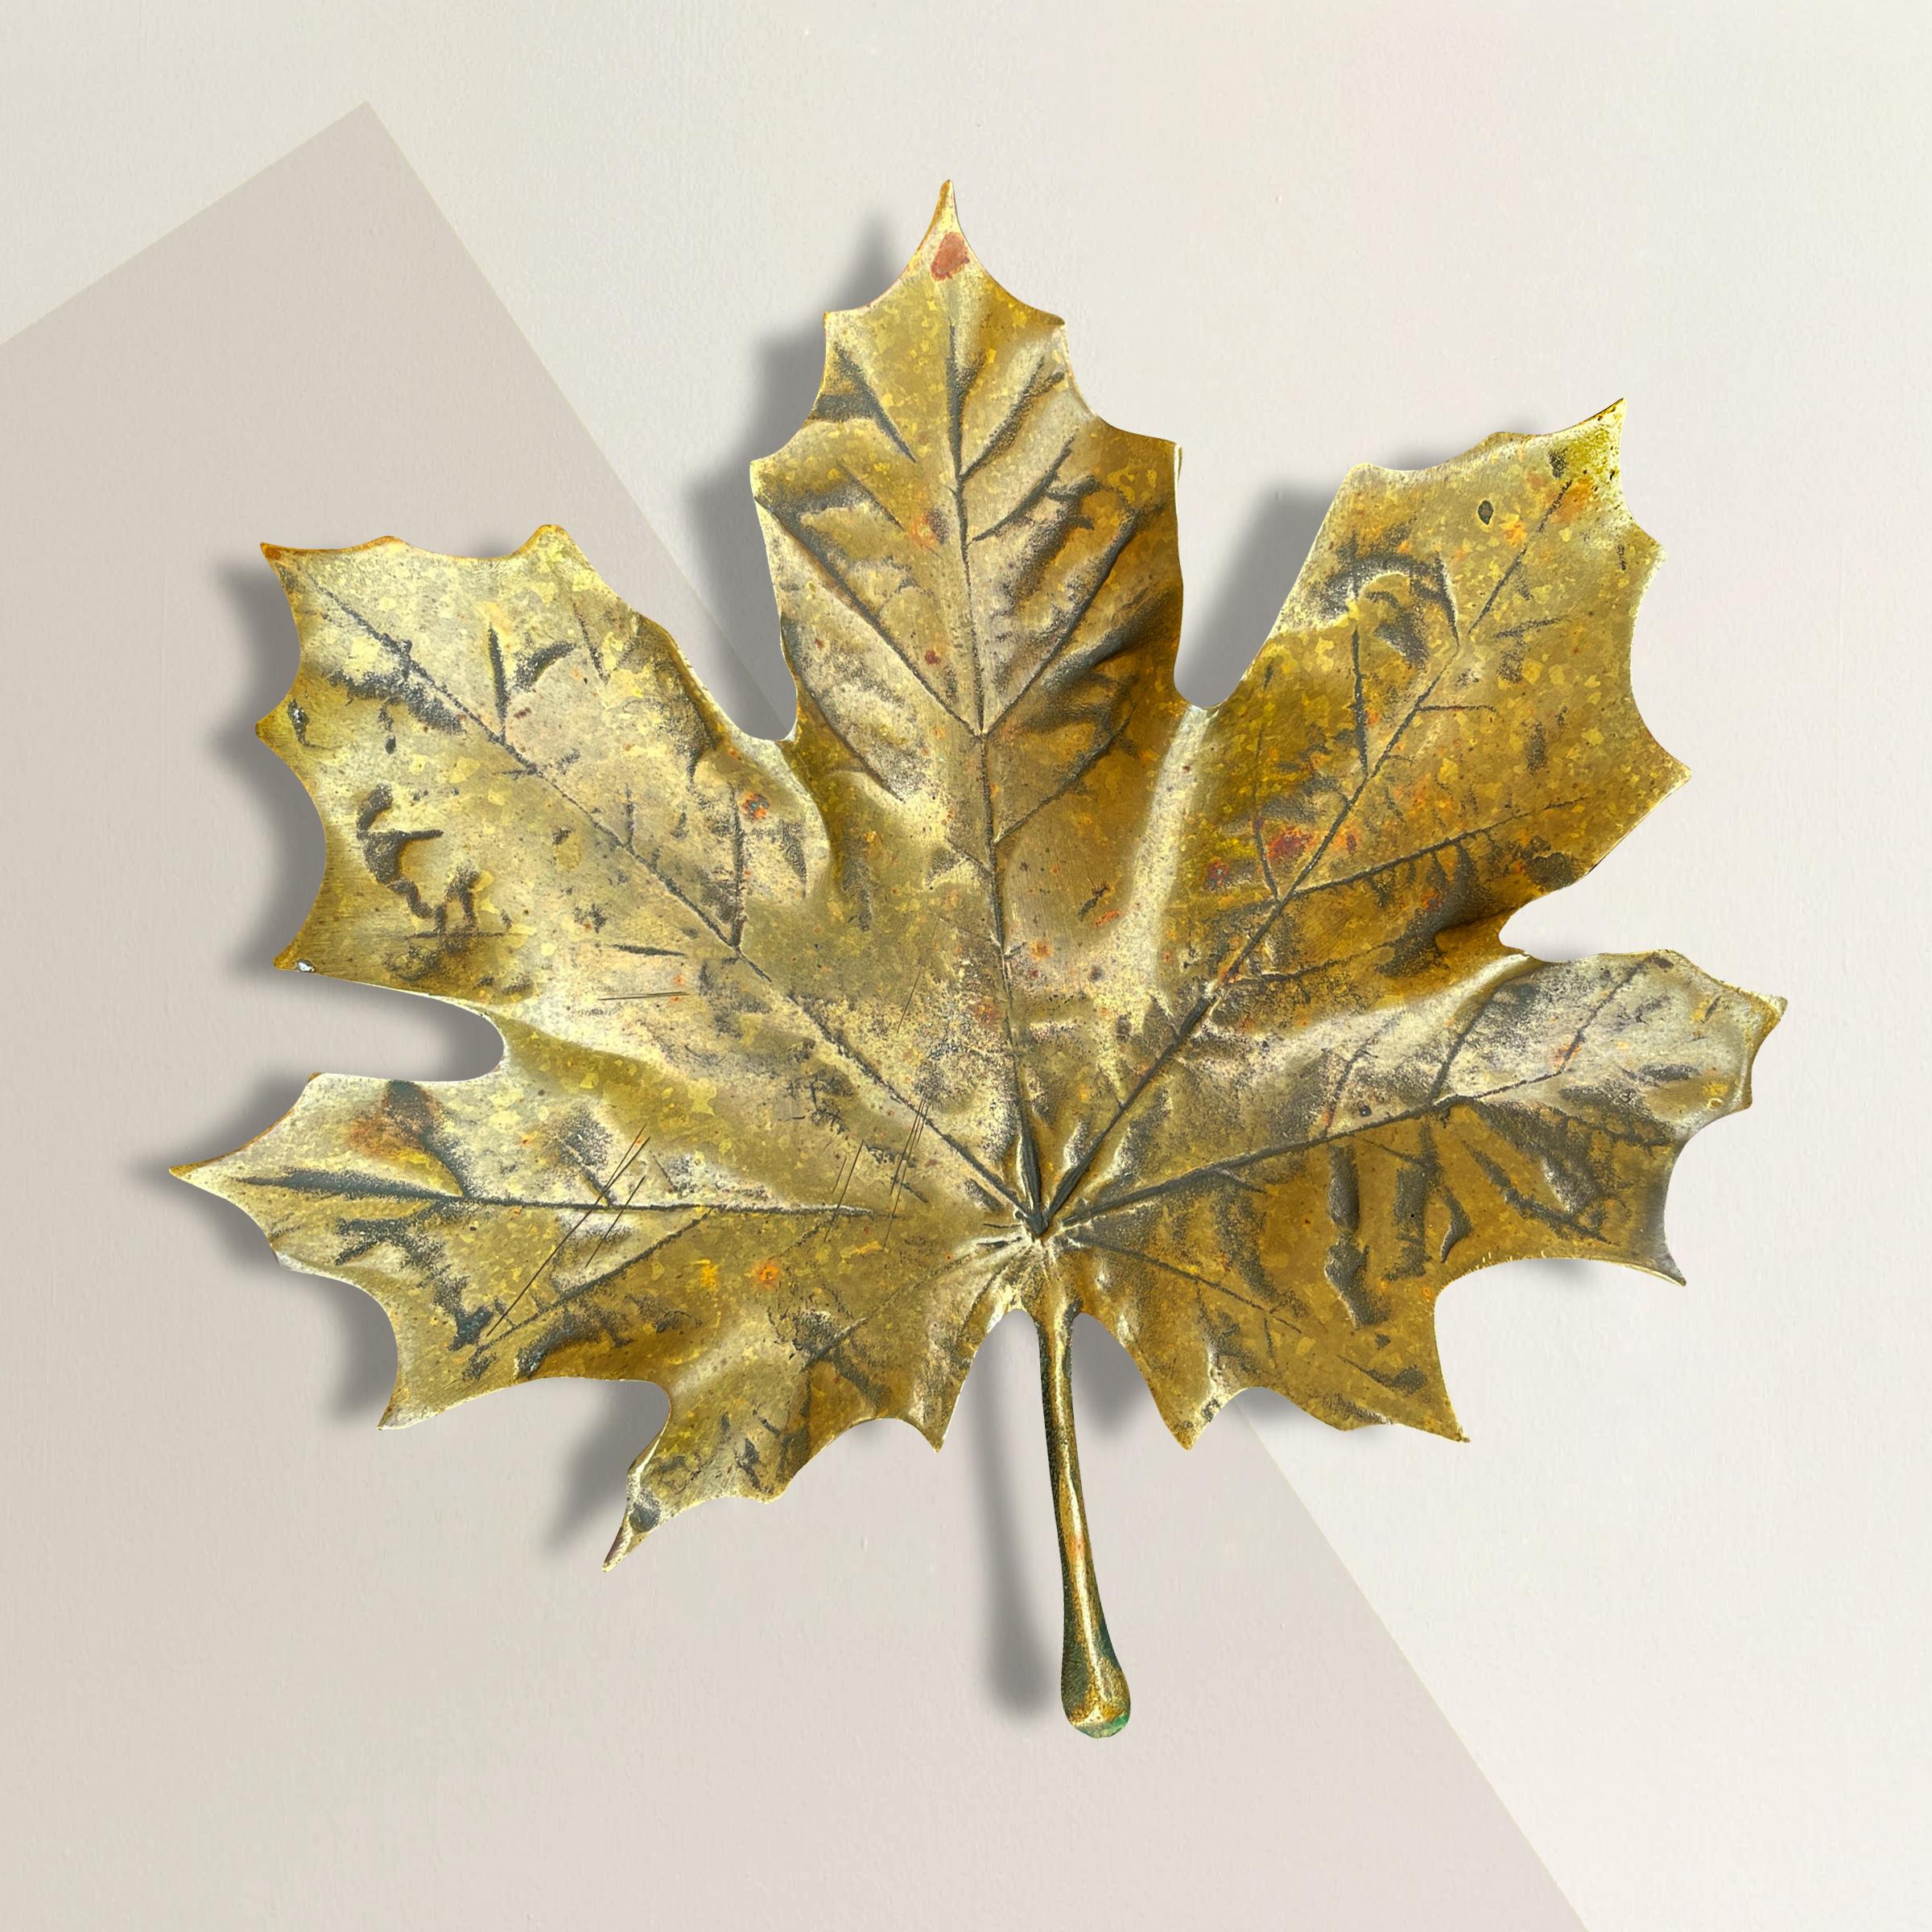 An incredible early-20th century American bronze maple leaf dish, cast from life, and with a wonderful patina only time can bestow on a piece of this age. Perfect for holding your keys, sunglasses, or pocket change on the table in your entry!